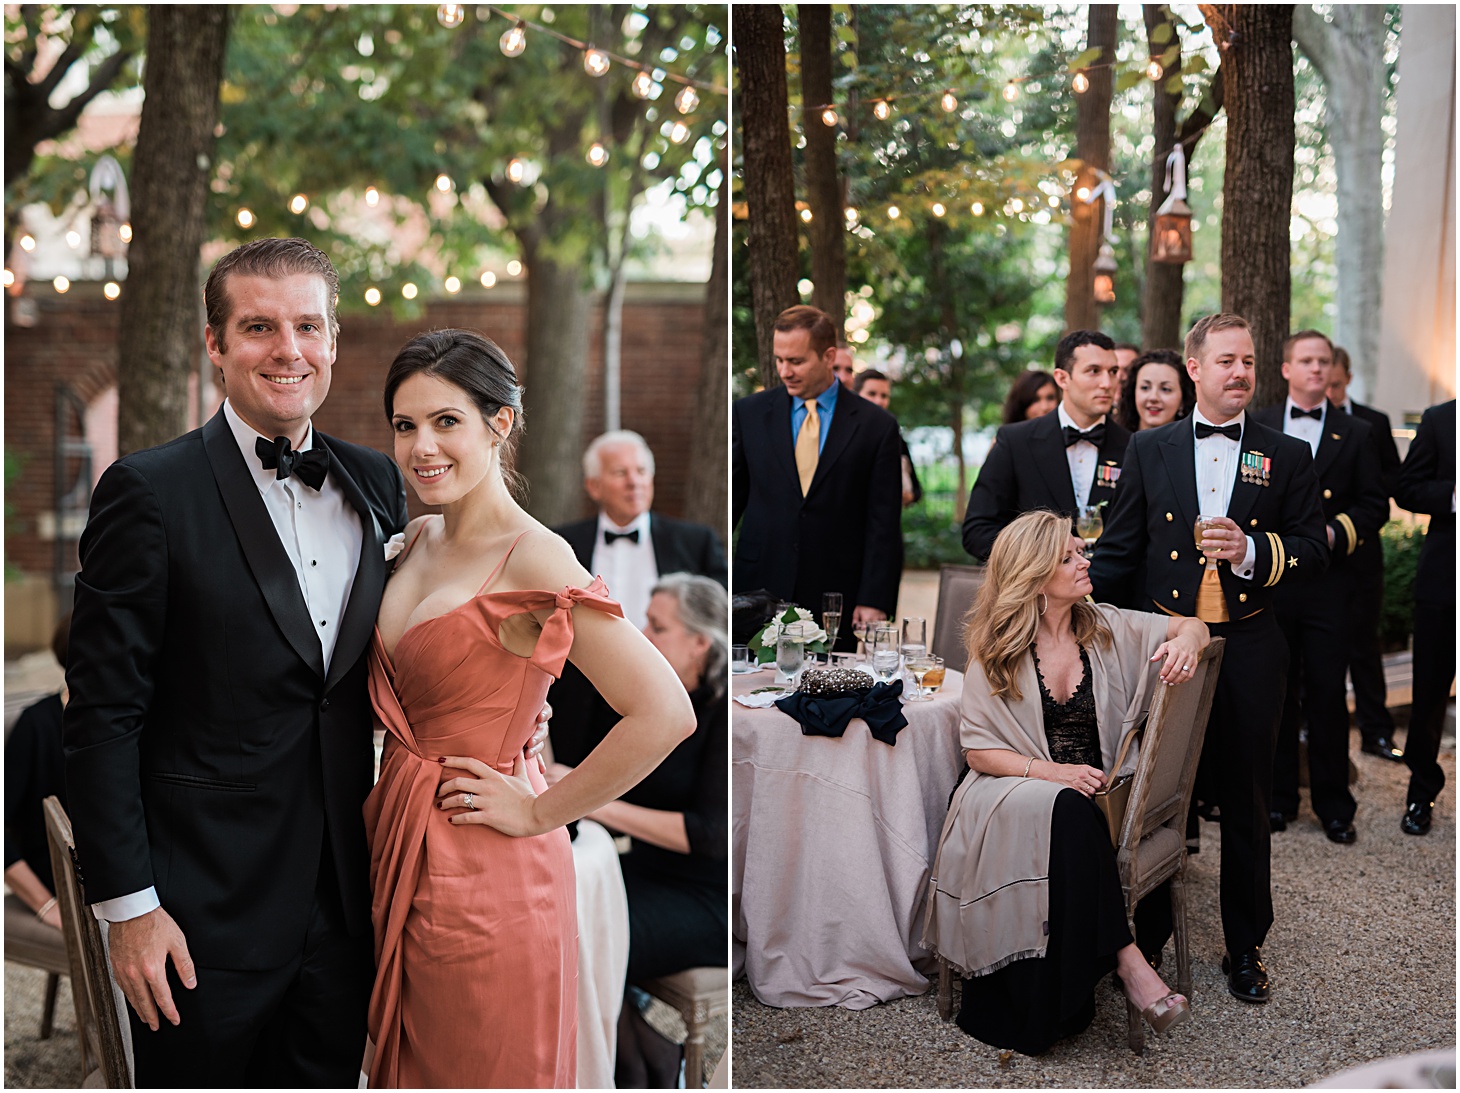 Outdoor cocktail hour - A Thoroughly Washingtonian Wedding at Meridian House in DC by Sarah Bradshaw 